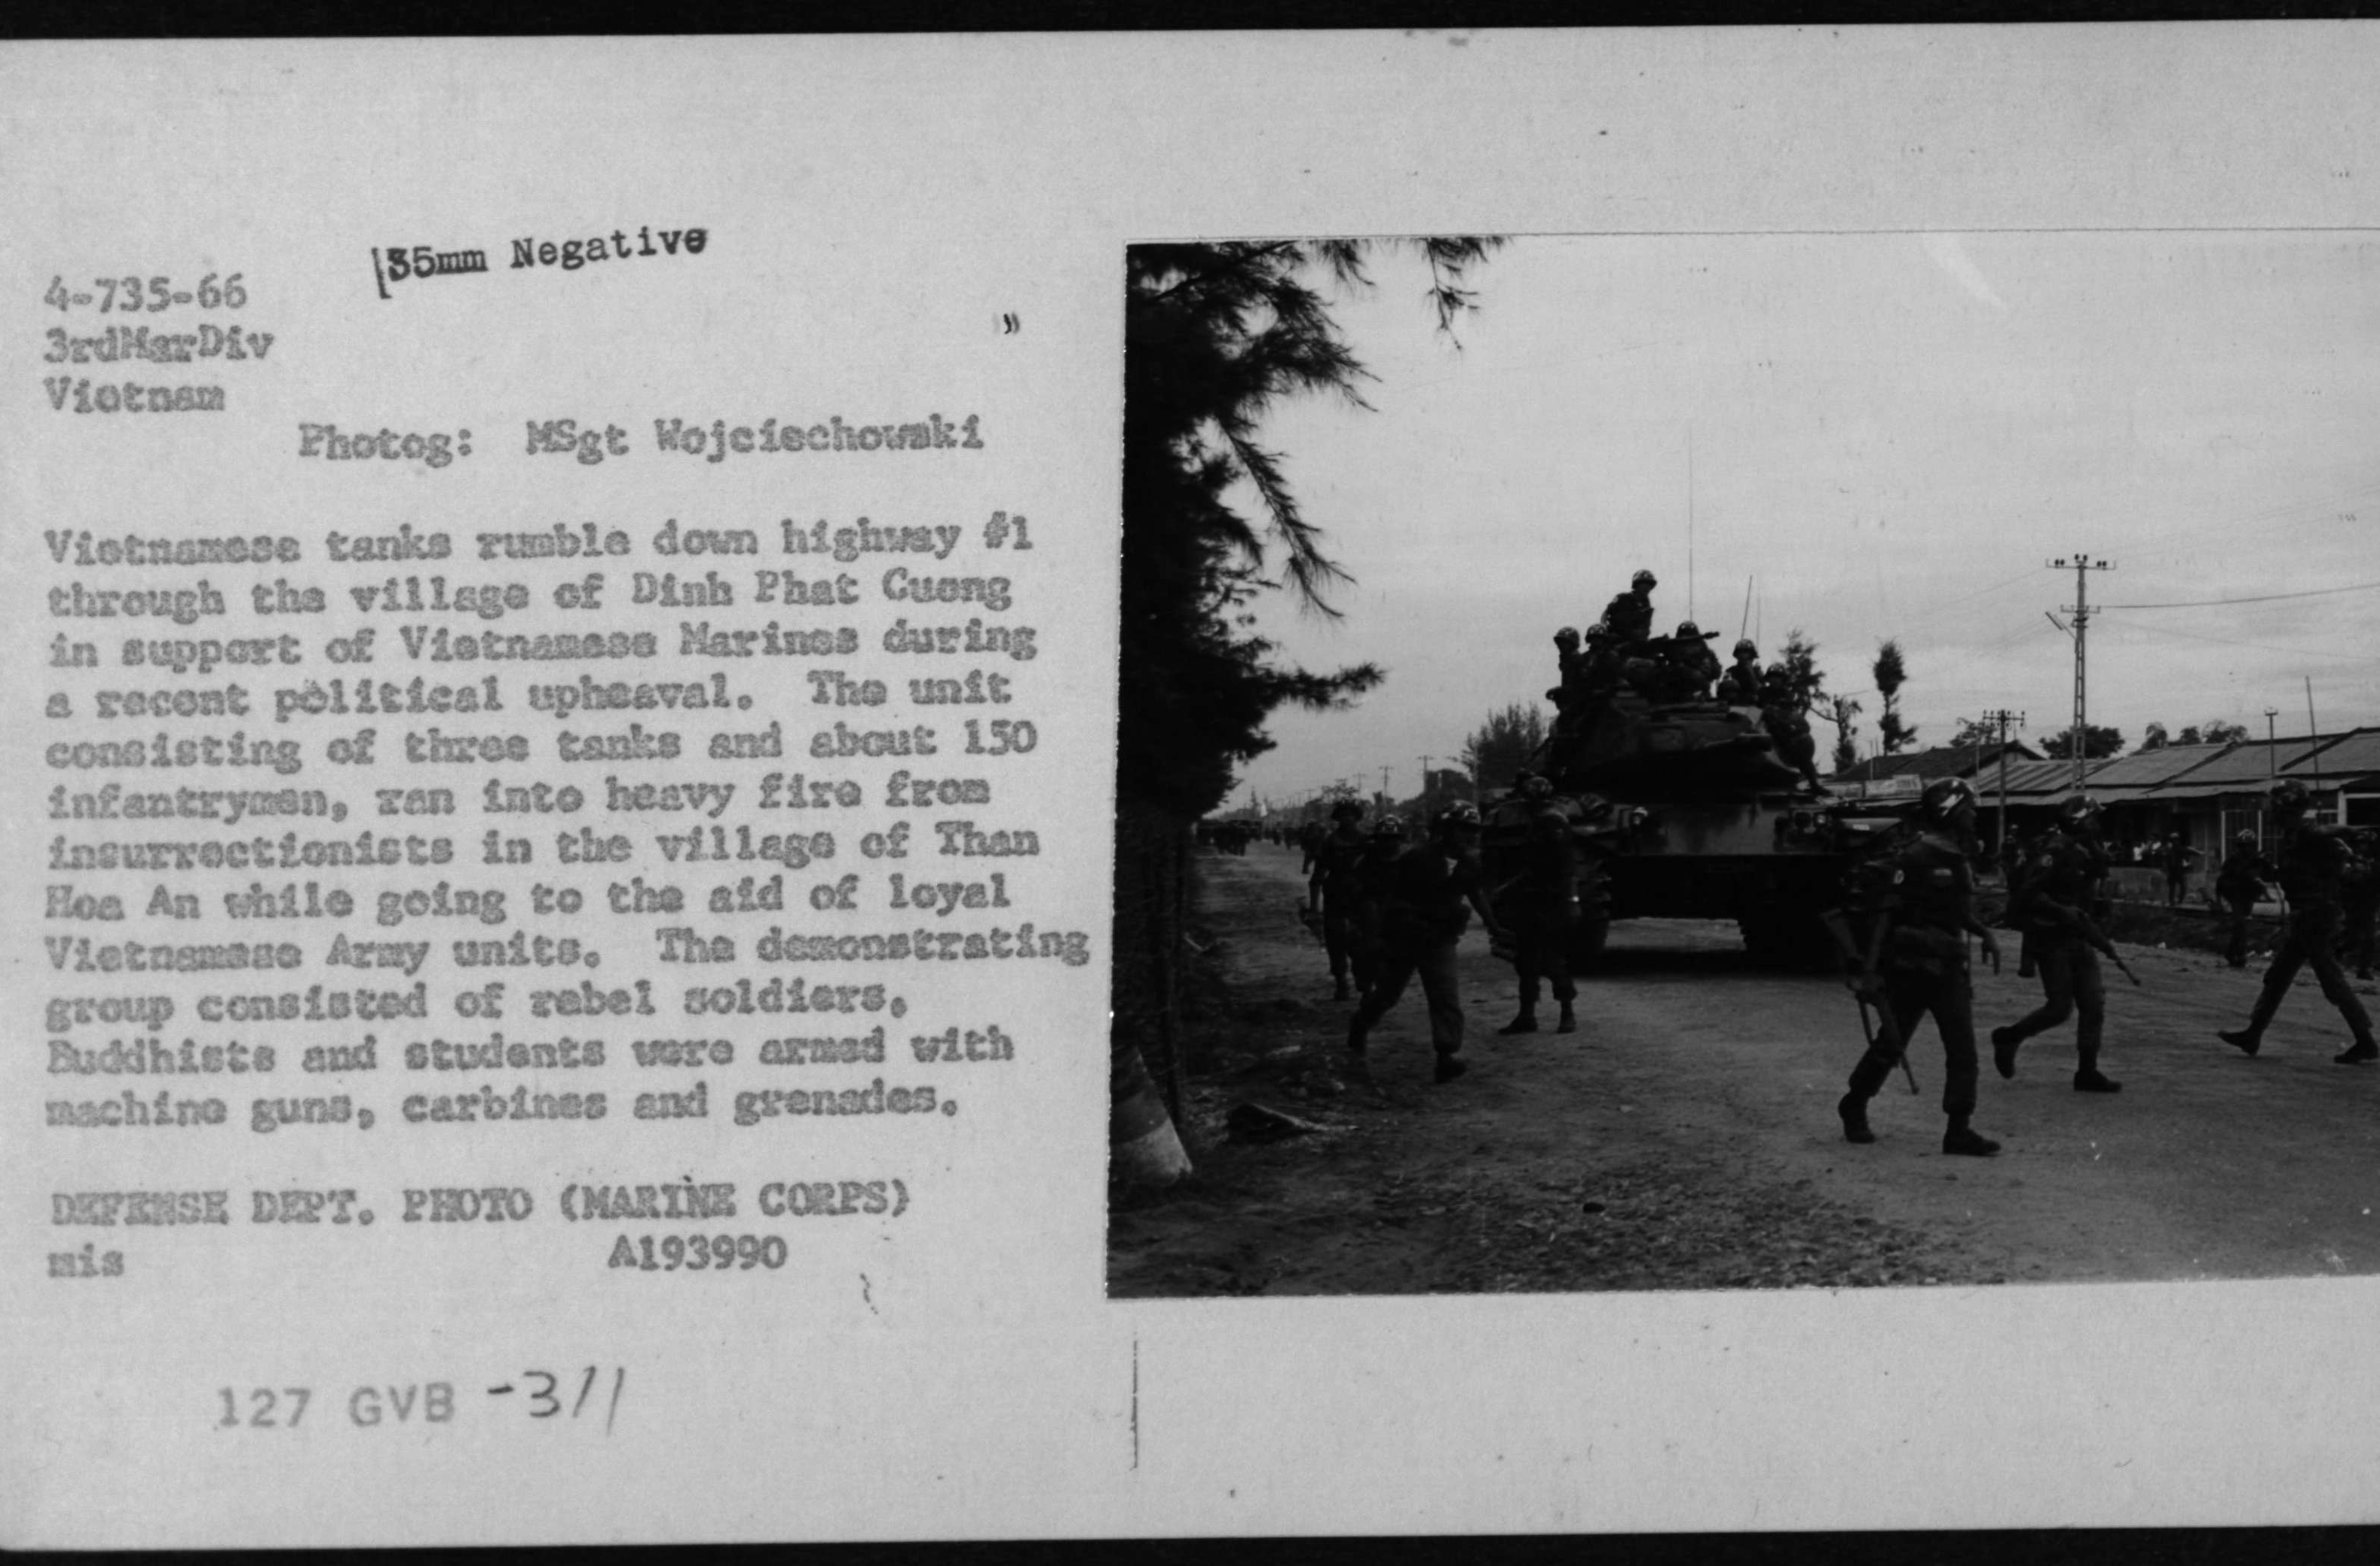 Vietnamese Tanks Rumble Through the Village of Dinh Phat Cuong